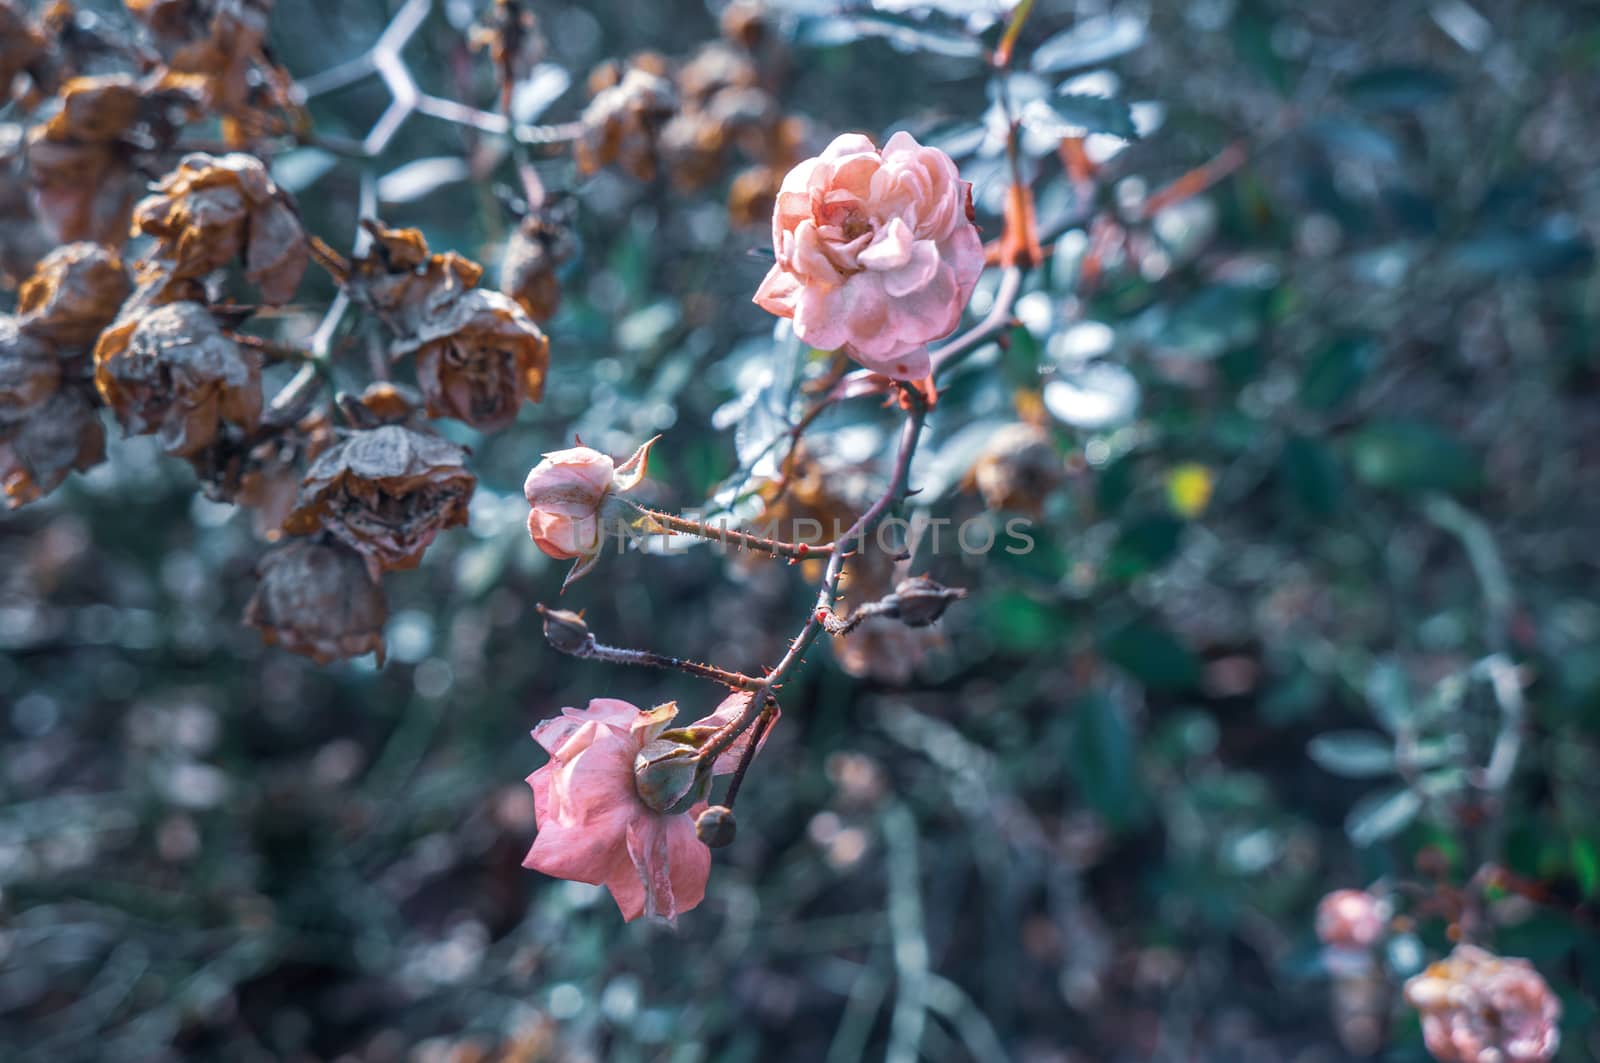 Cool toned small pink roses and rose buds blooming on thorn branch. Dried brown roses in the blurry background. Romantic, soft and tender concept.